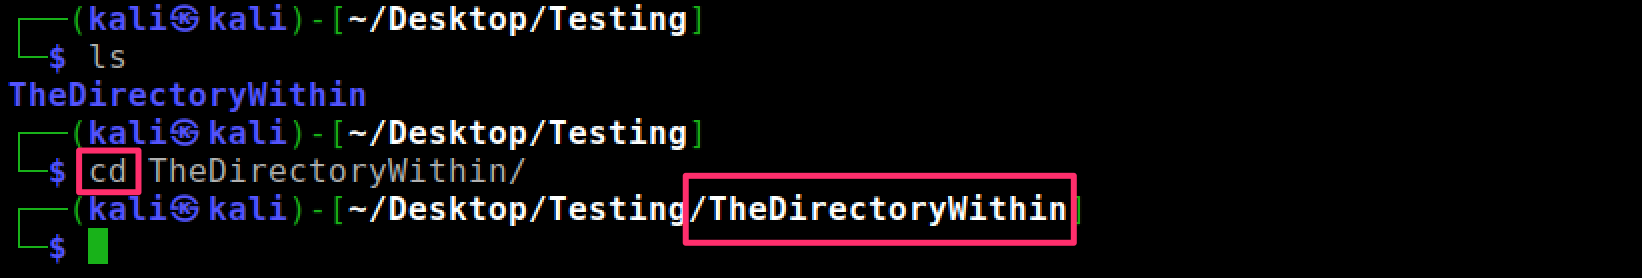 Changing Directories